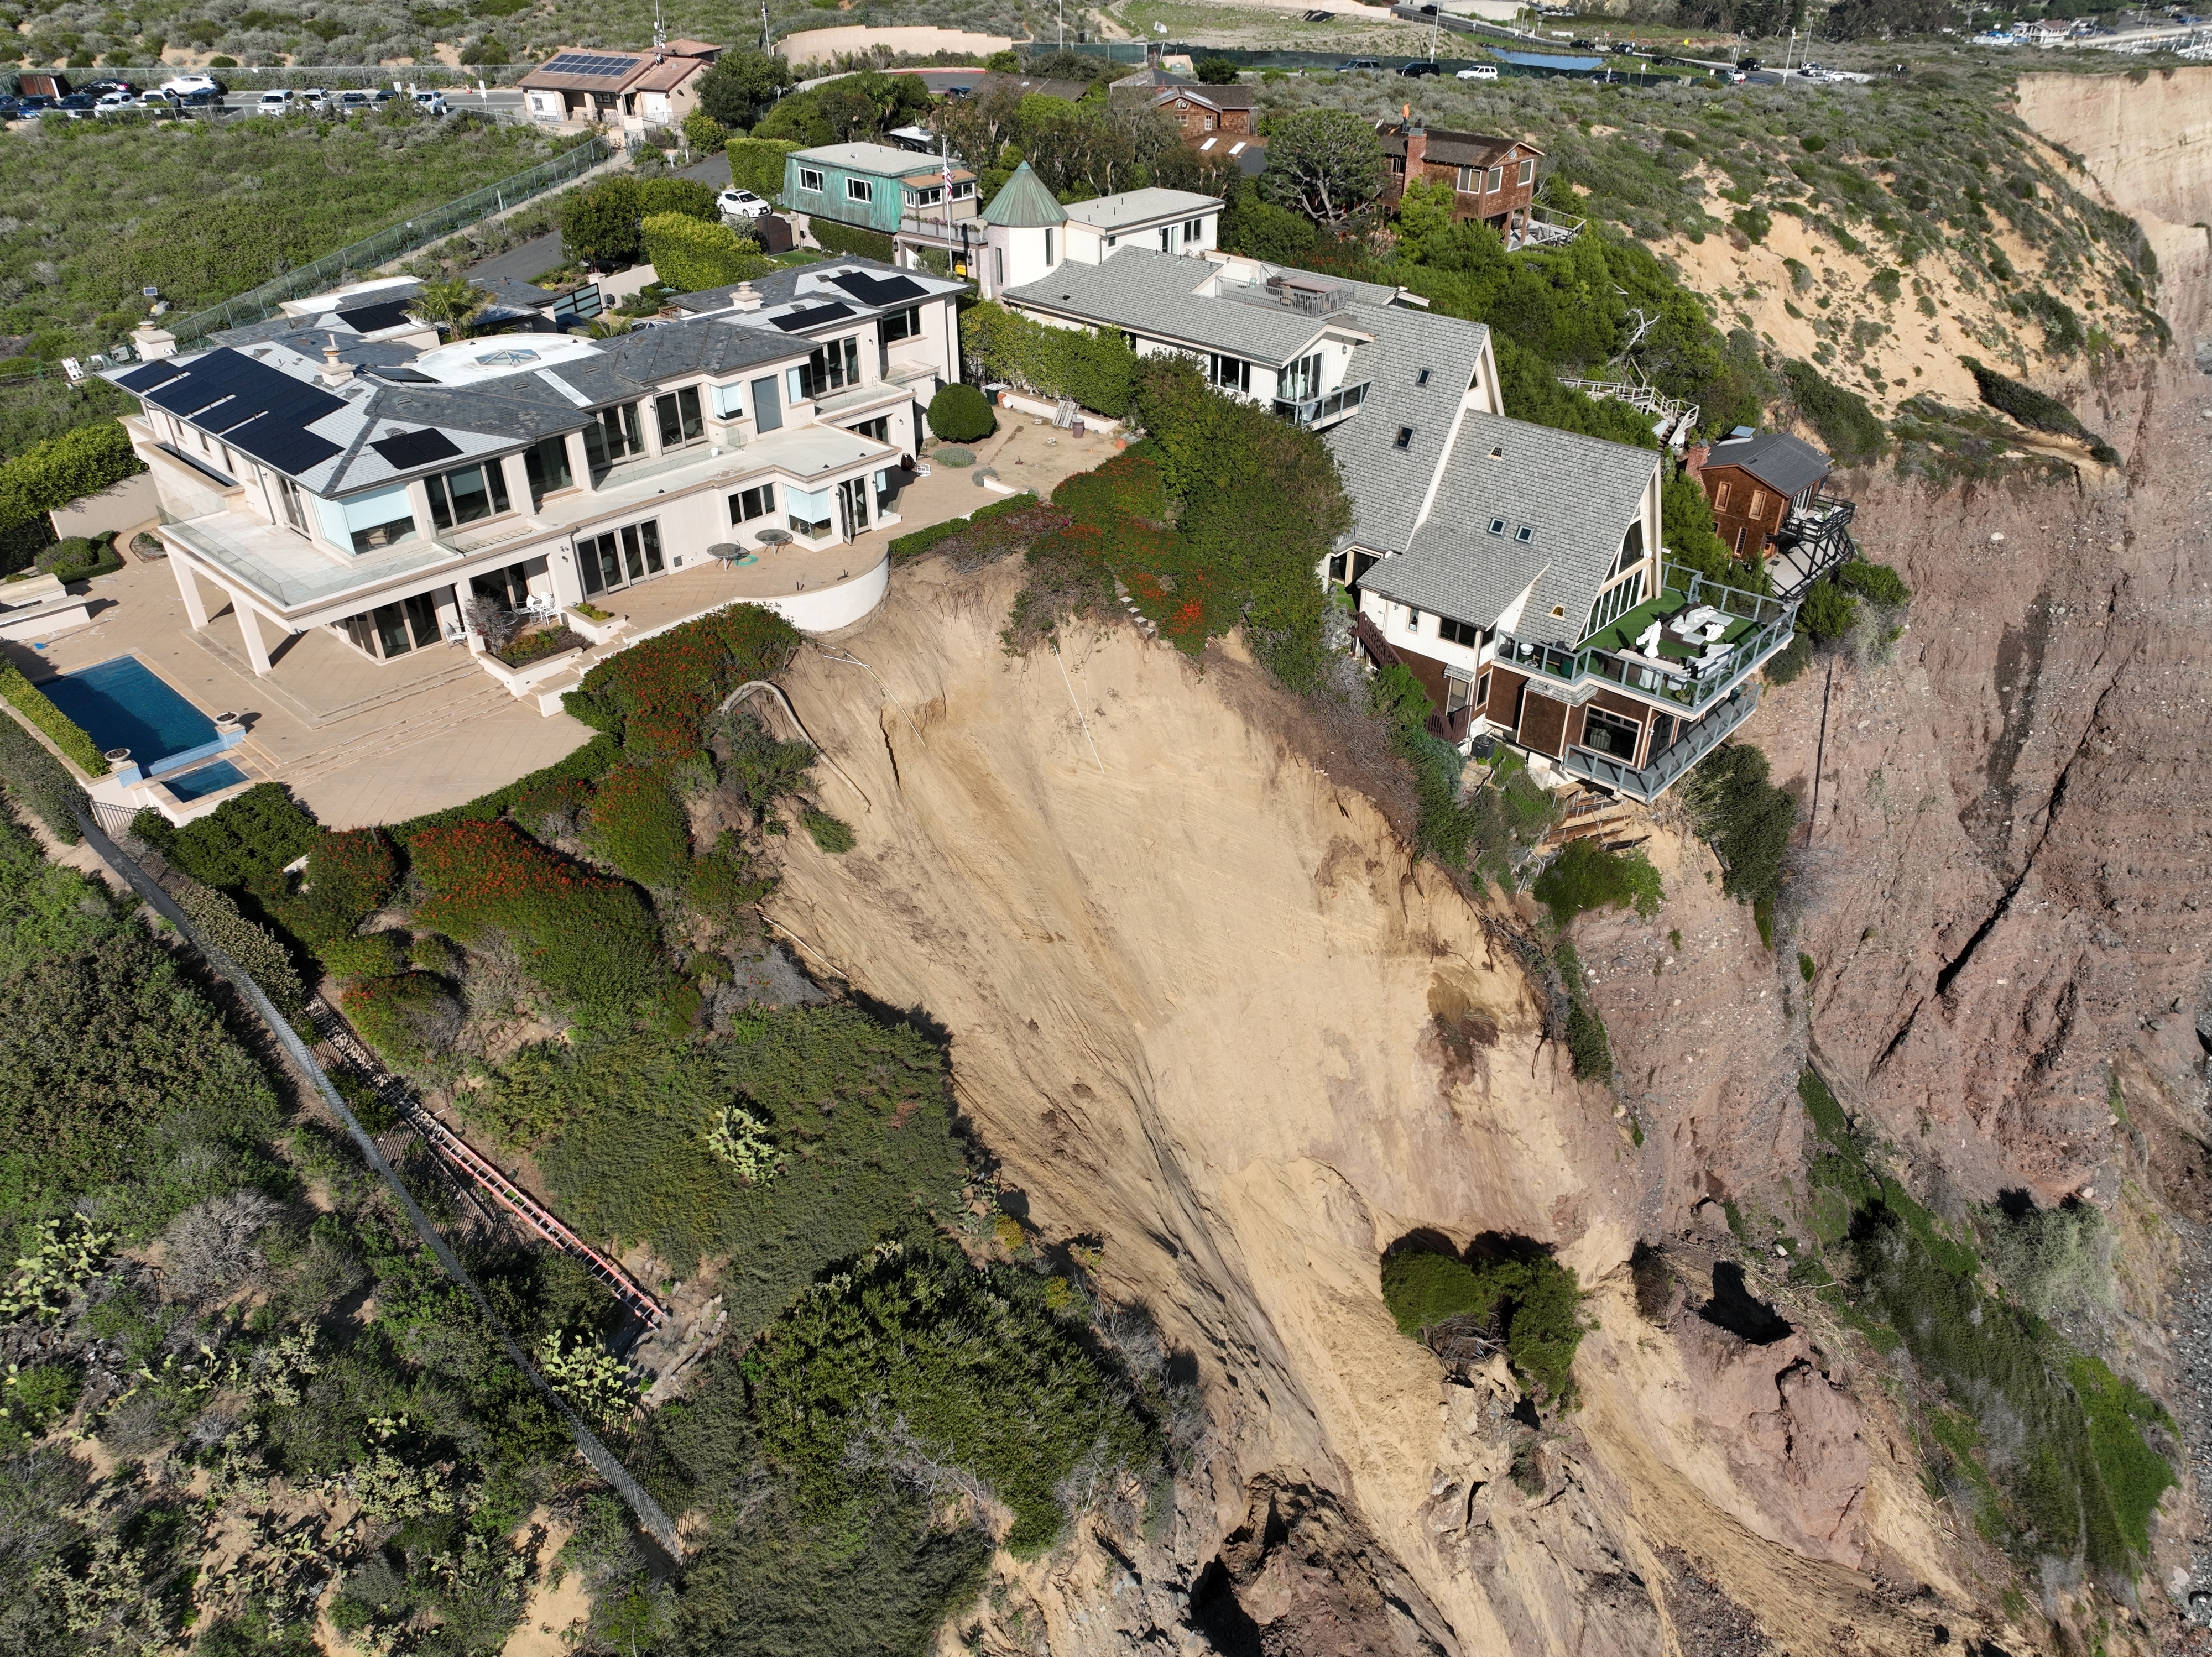 Aerial view of coastal homes on the edge of a cliff with visible erosion